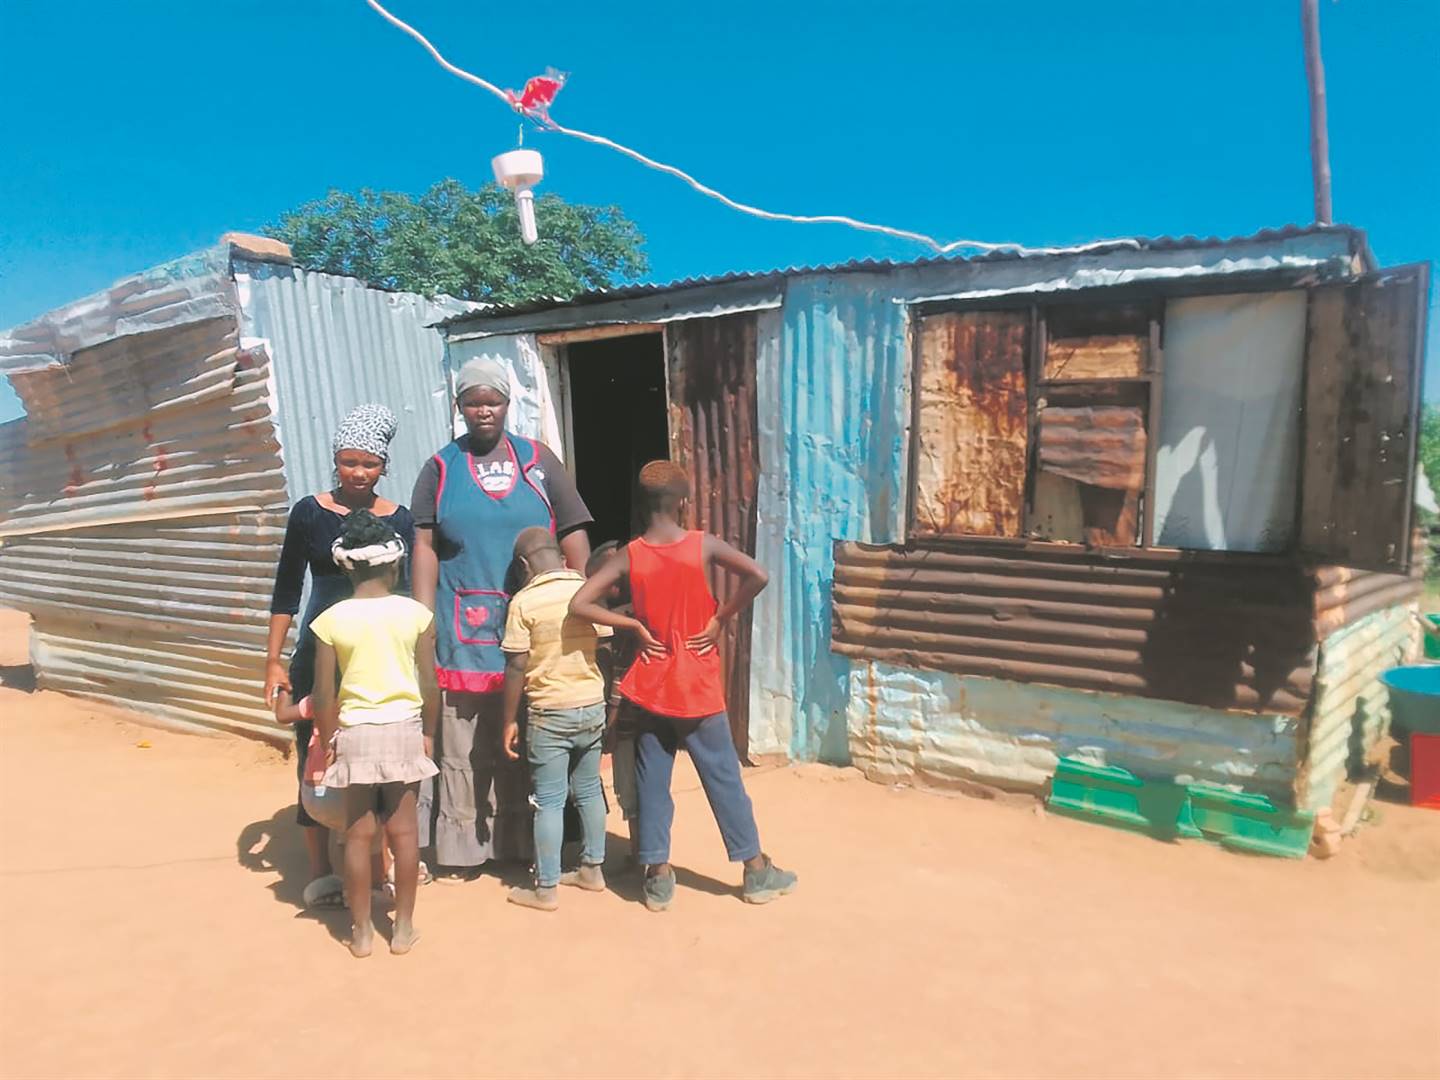 Tlhoriso Ndlovu (21) and her sister Millicent Ndlovu are appealing for any help as their family lives in a dilapidated shack in Mmakaunyane, North West.          Photo by Raymond Morare